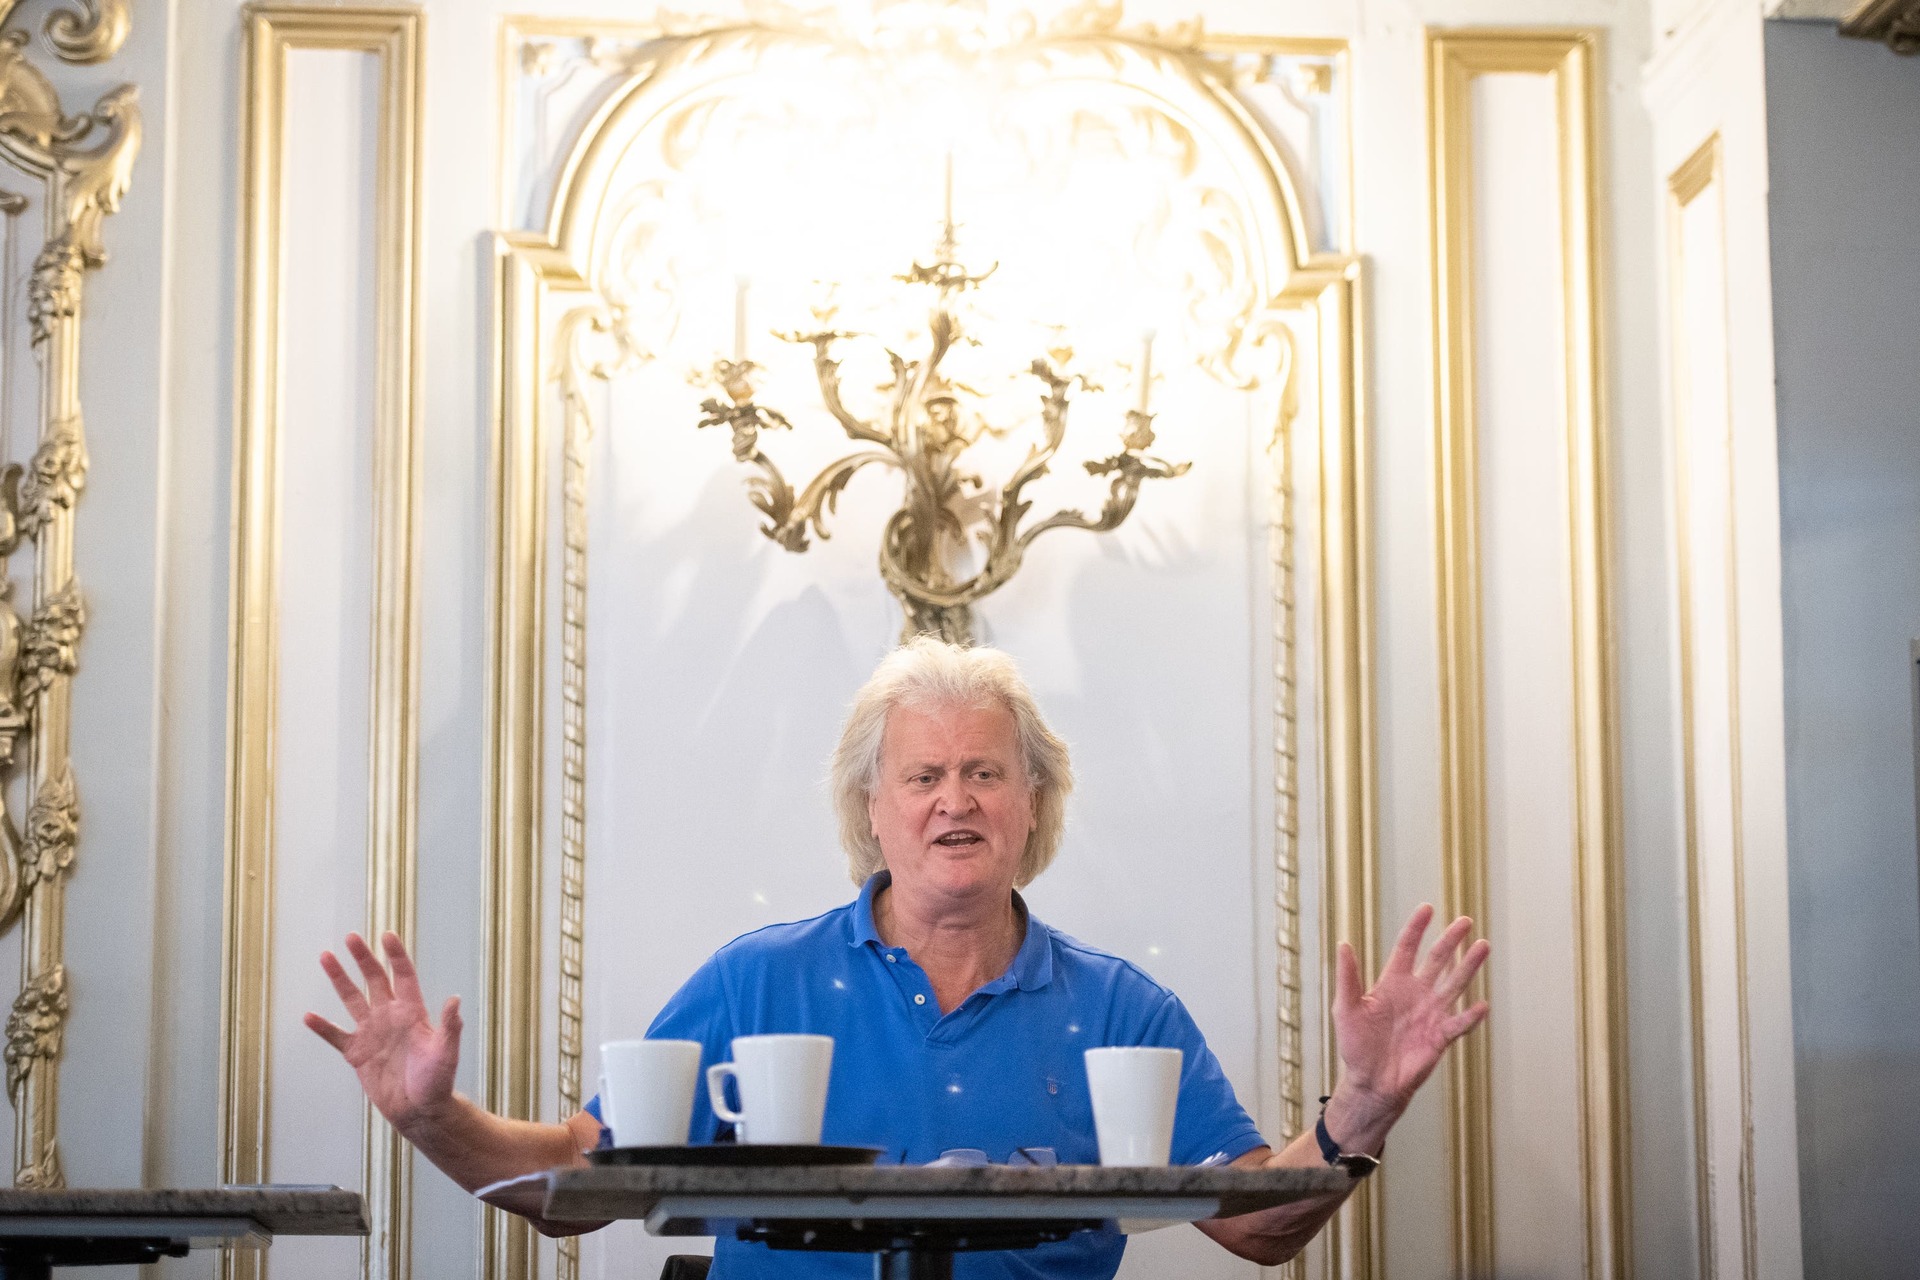 Wetherspoons founder and chairman Tim Martin said tax disparity is the ‘biggest threat to the hospitality industry’.